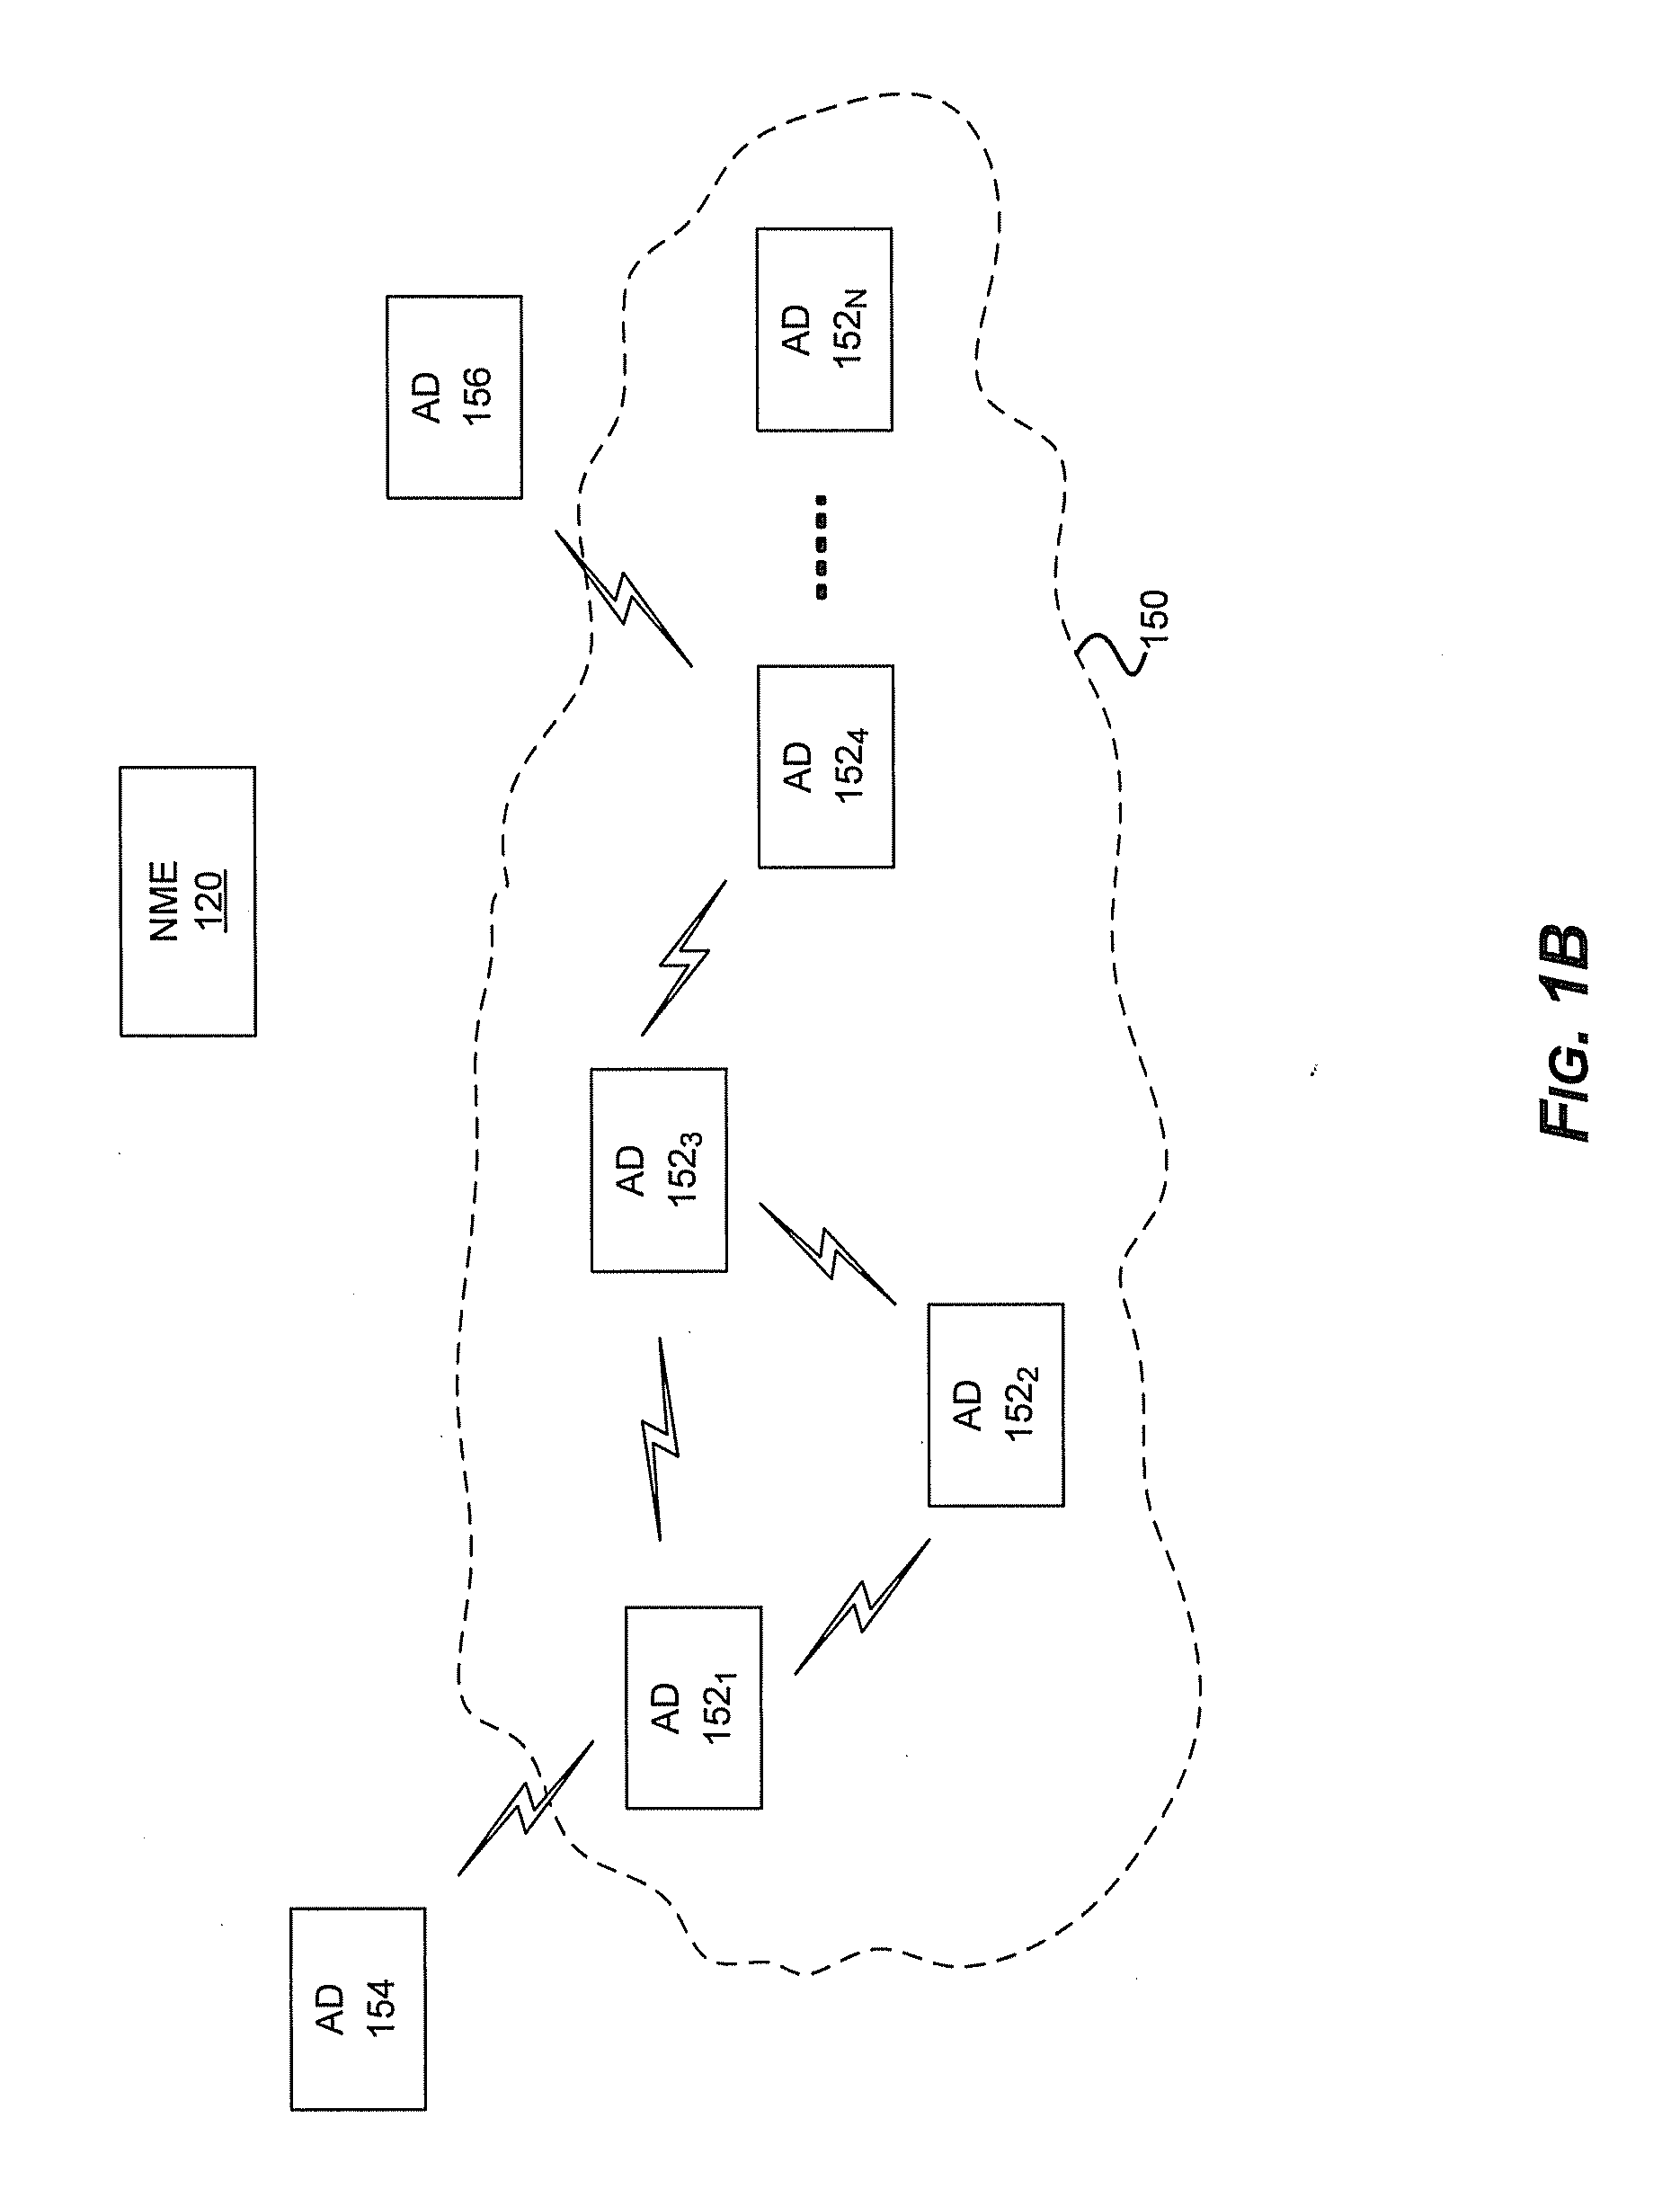 Method and system for a repeater network that utilizes distributed transceivers with array processing